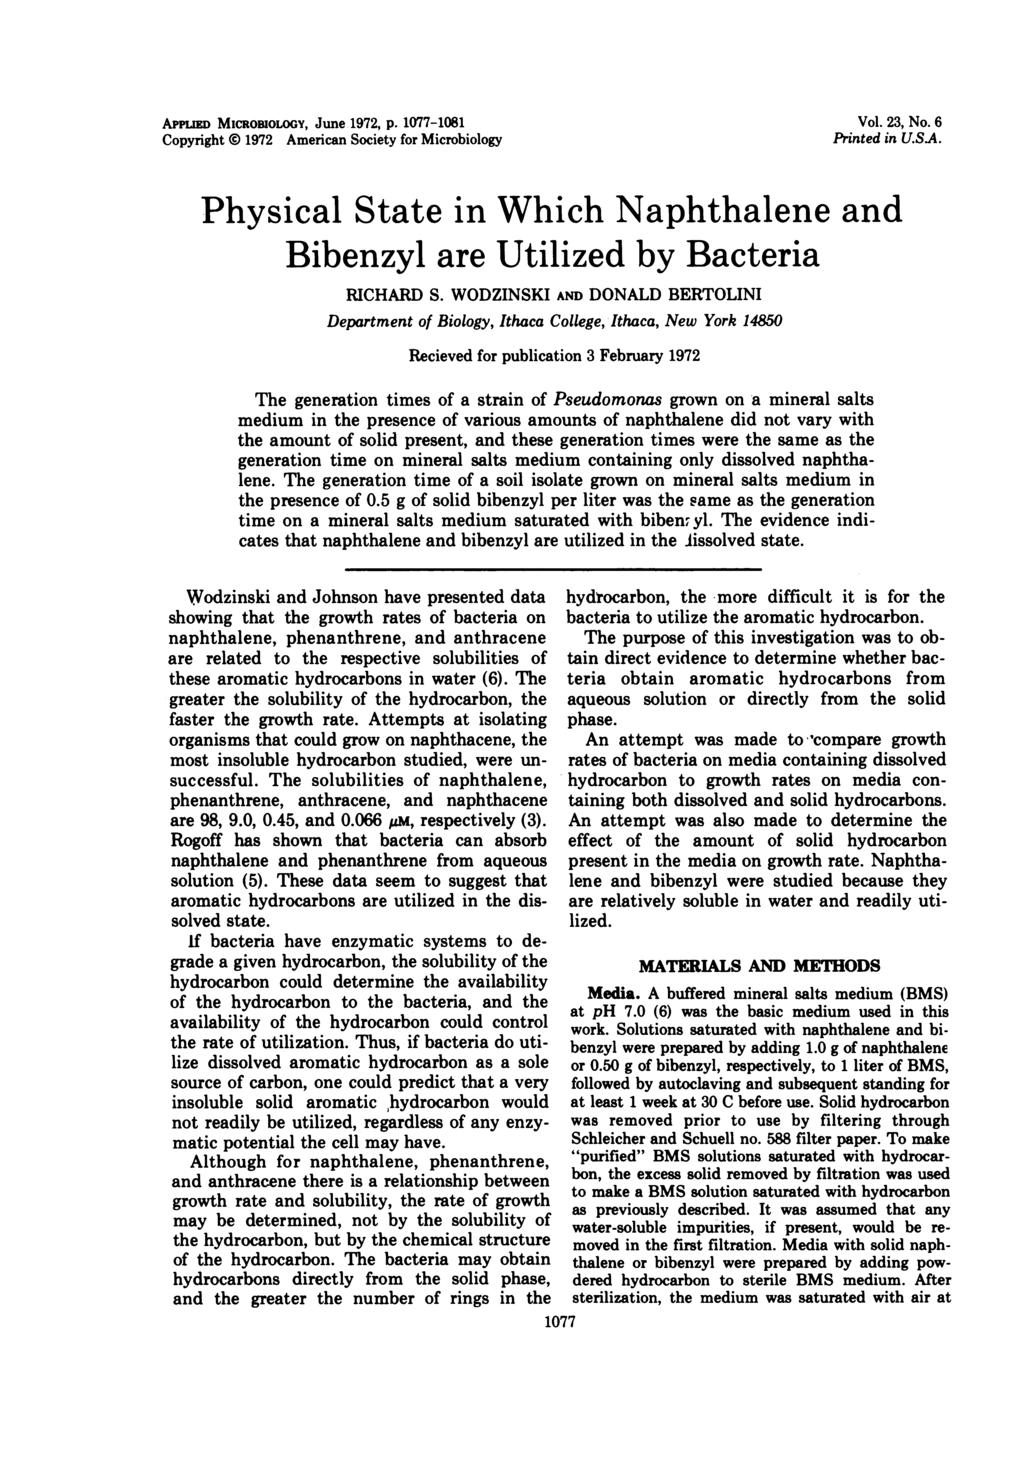 APPLIED MicRosoLowy, June 1972, p. 1077-1081 Copyright i 1972 American Society for Microbiology Vol. 23, No. 6 Printed in U.S.A. Physical State in Which Naphthalene and Bibenzyl are Utilized by Bacteria RICHARD S.